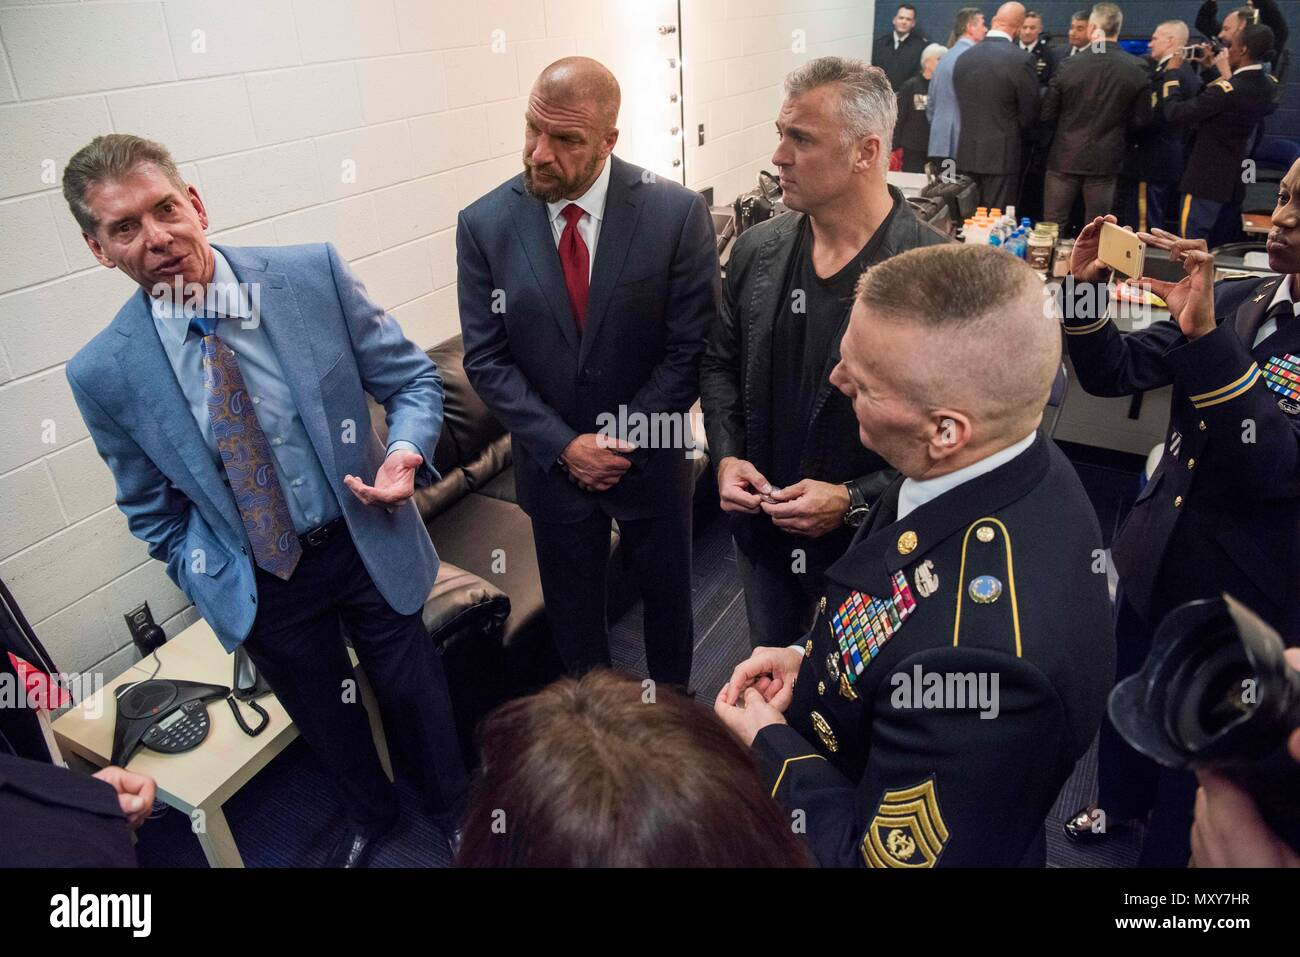 WWE CEO Vince McMahon, Paul 'Triple H' Levesque, and Shane McMahon speak to Army Command Sgt. Maj. John W. Troxell, Senior Enlisted Advisor to the Chairman  of the Joint Chiefs of Staff, before the 14th Annual Tribute to the Troops Event at the Verizon Center in Washington, D.C., Dec. 13, 2016. WWE Tribute to the Troops is an annual event held by WWE and Armed Forces Entertainment in December during the holiday season since 2003, to honor and entertain United States Armed Forces members. WWE performers and employees travel to military camps, bases and hospitals, including the Walter Reed Army  Stock Photo